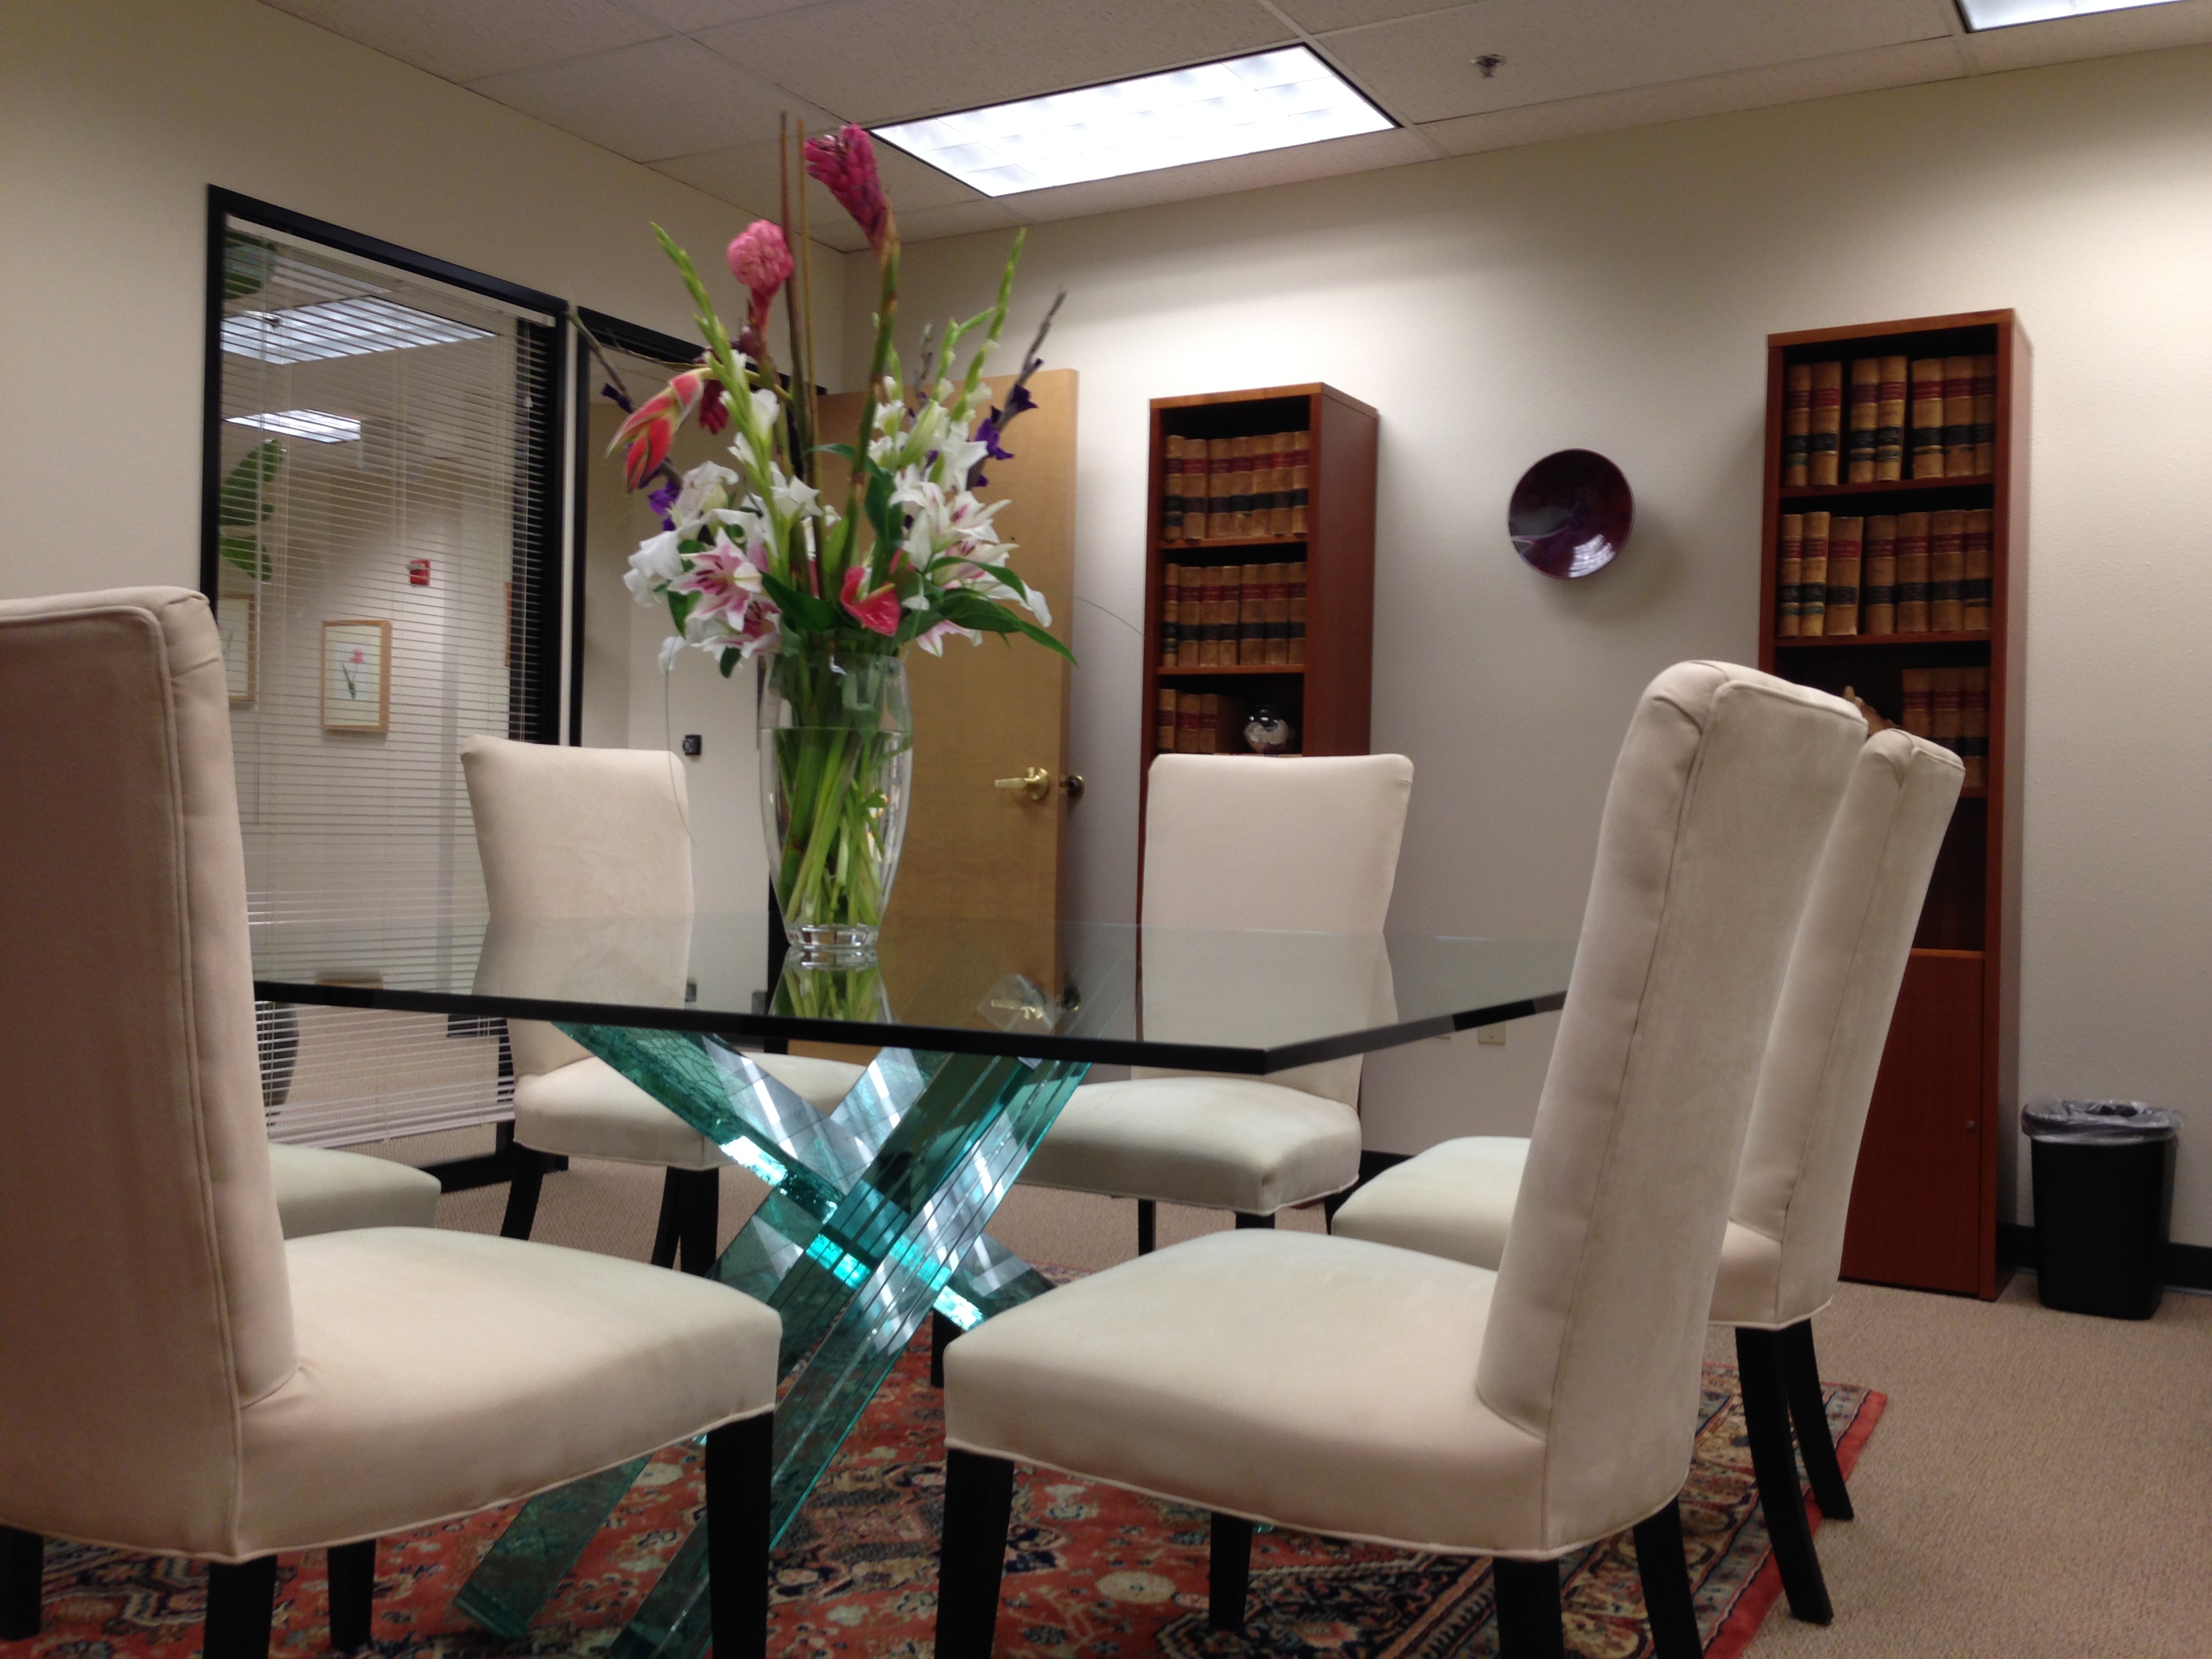 The conference room at Bier Family Law, where many divorces are settled through mediation.